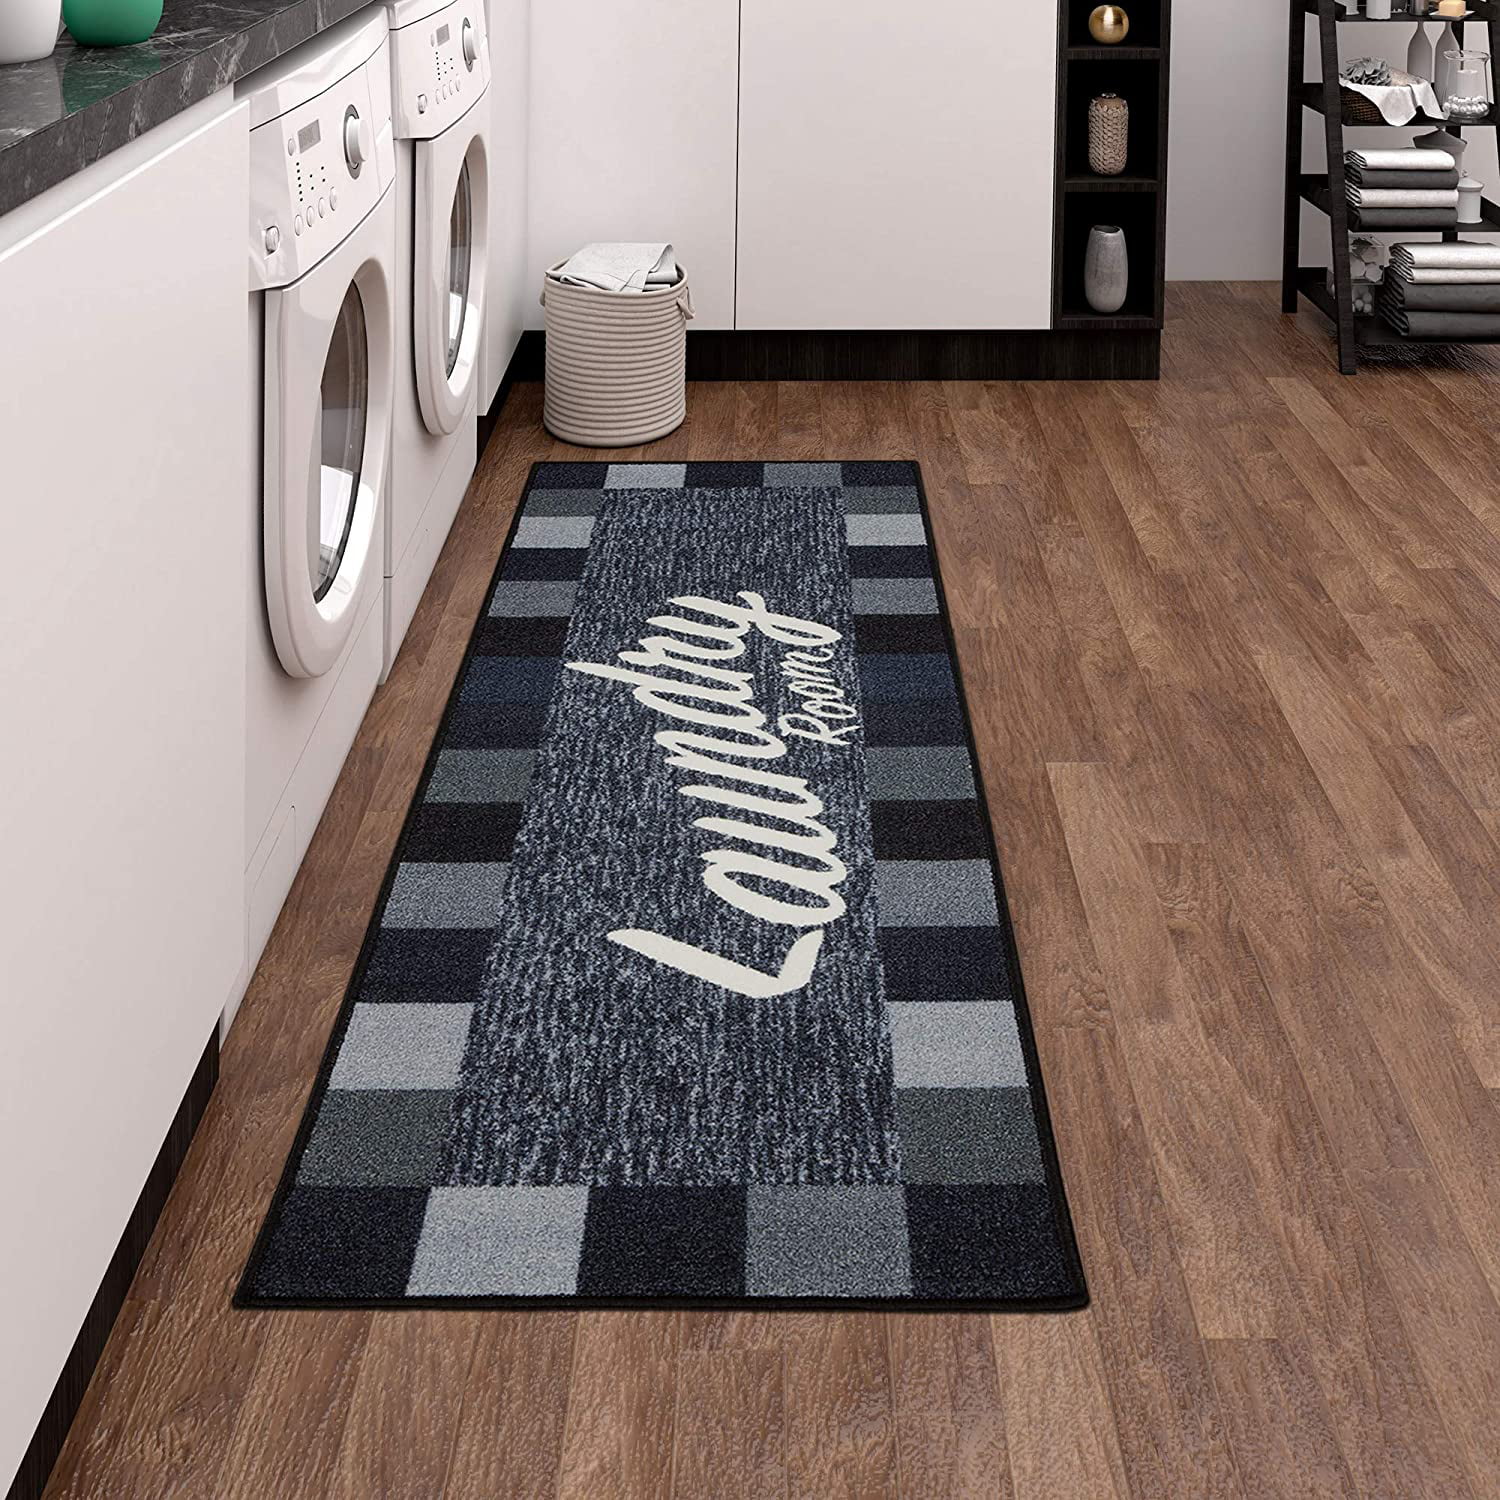 Details about   Rug Runner-Black/Gray Laundry room-Stain & Fade Resistant Rectangular 20"X59" 